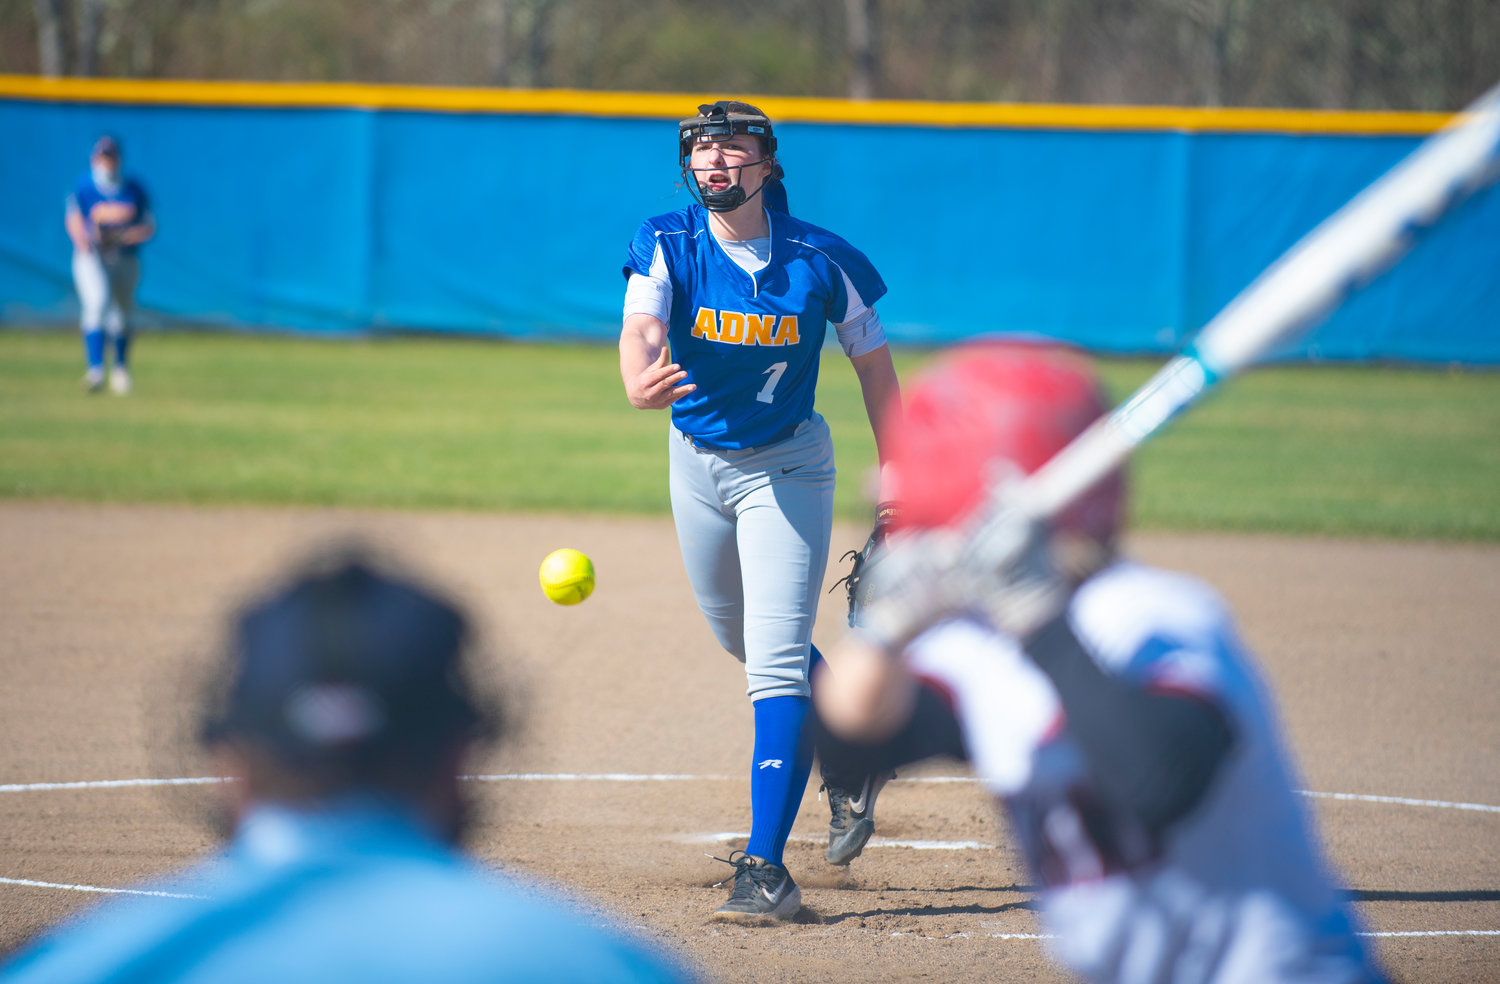 Adna senior pitcher Haley Rainey delivers a pitch to Toledo leadoff hitter Brynn Williams on Monday in Adna.